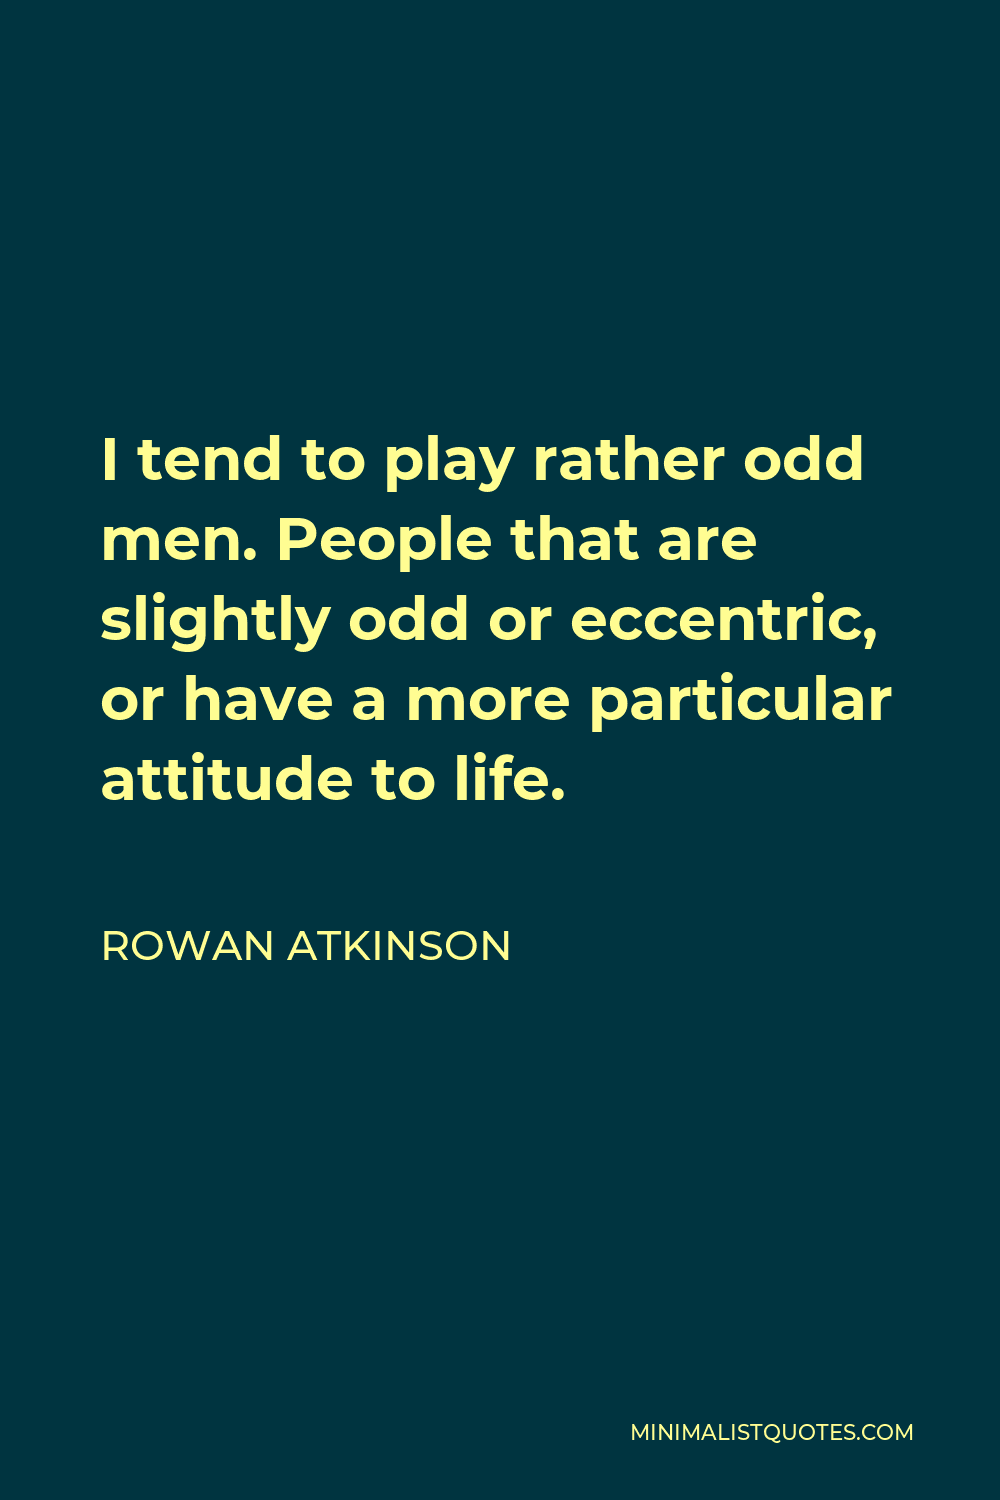 Rowan Atkinson Quote - I tend to play rather odd men. People that are slightly odd or eccentric, or have a more particular attitude to life.